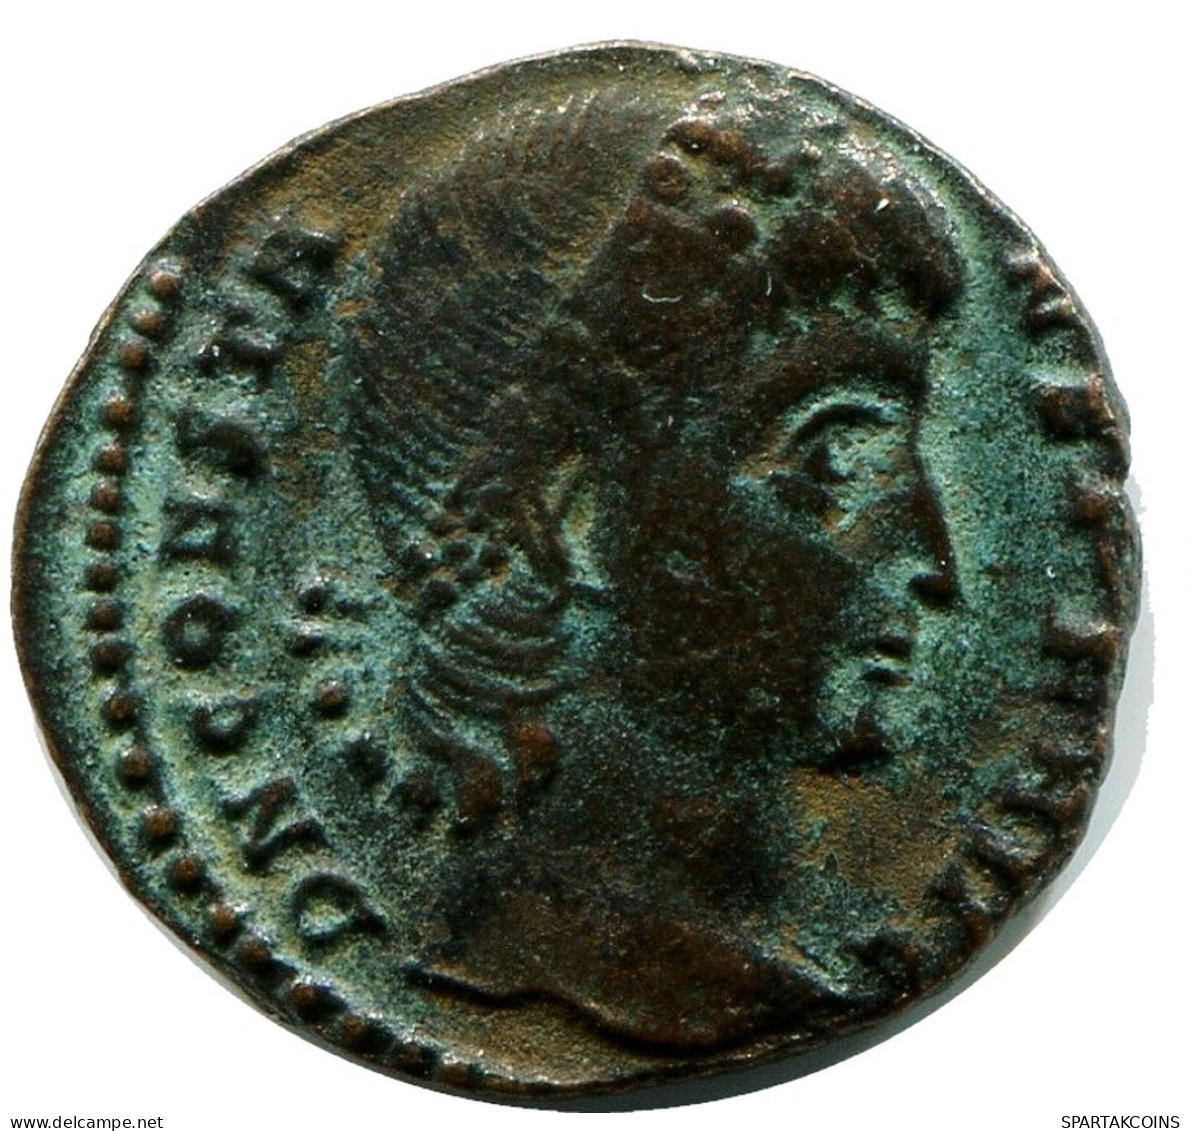 CONSTANS MINTED IN CONSTANTINOPLE FOUND IN IHNASYAH HOARD EGYPT #ANC11930.14.U.A - L'Empire Chrétien (307 à 363)